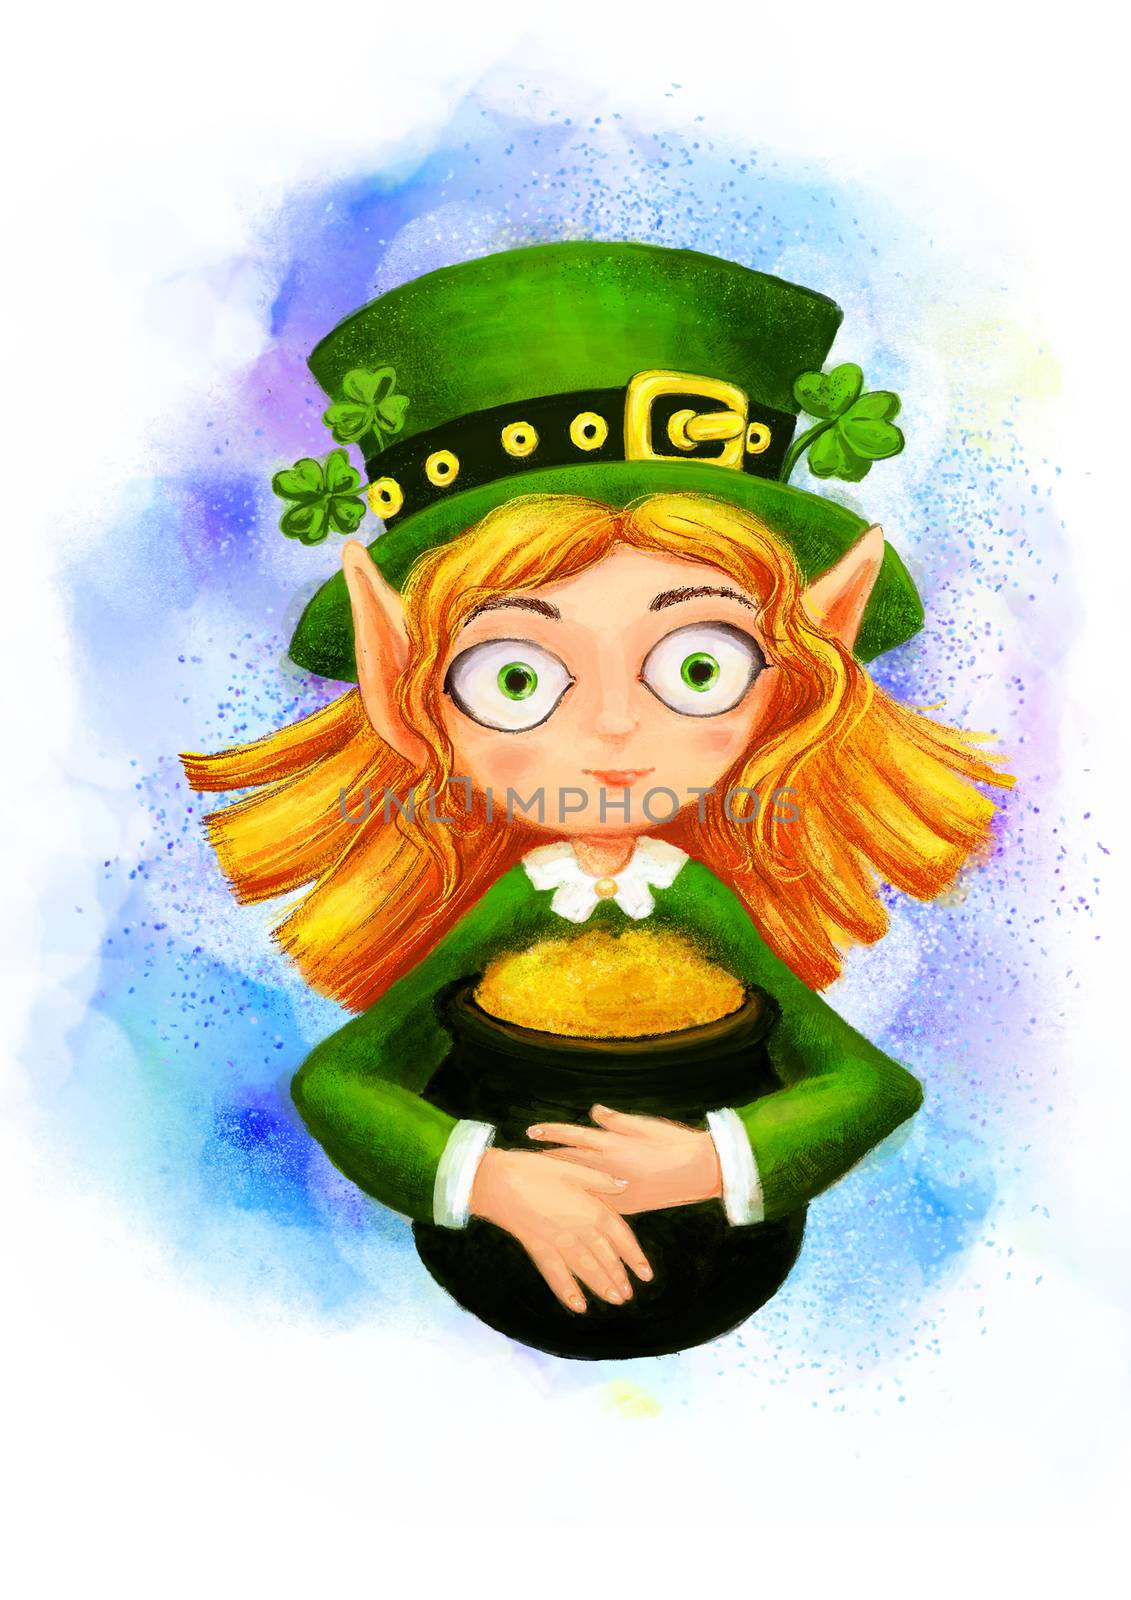 Leprechaun with a pot of gold and clover by heliburcka